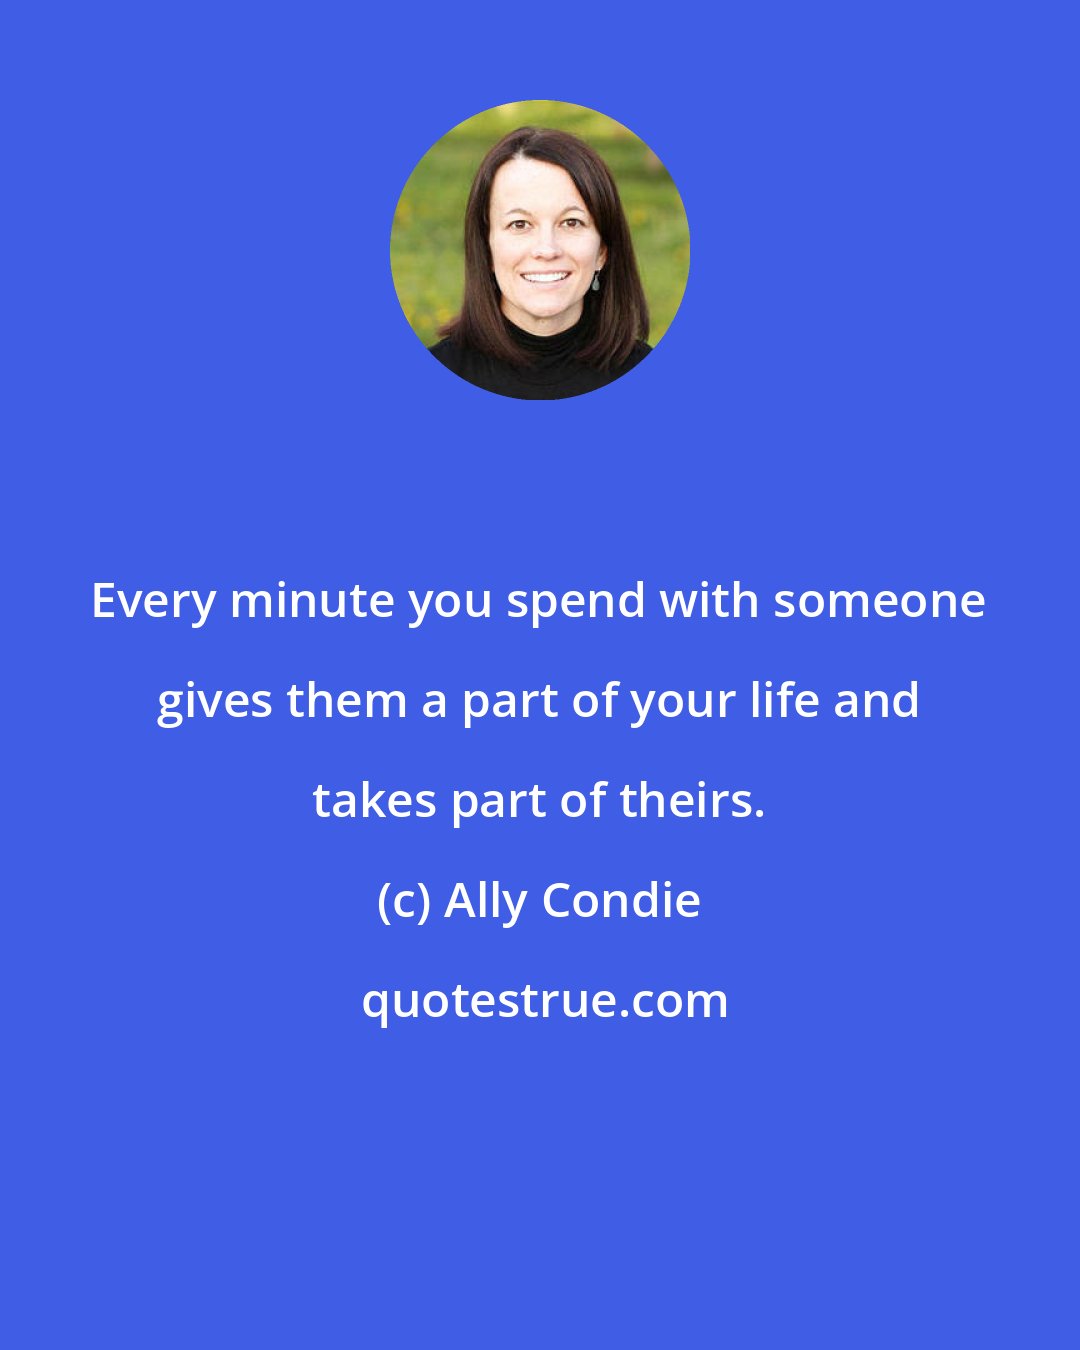 Ally Condie: Every minute you spend with someone gives them a part of your life and takes part of theirs.